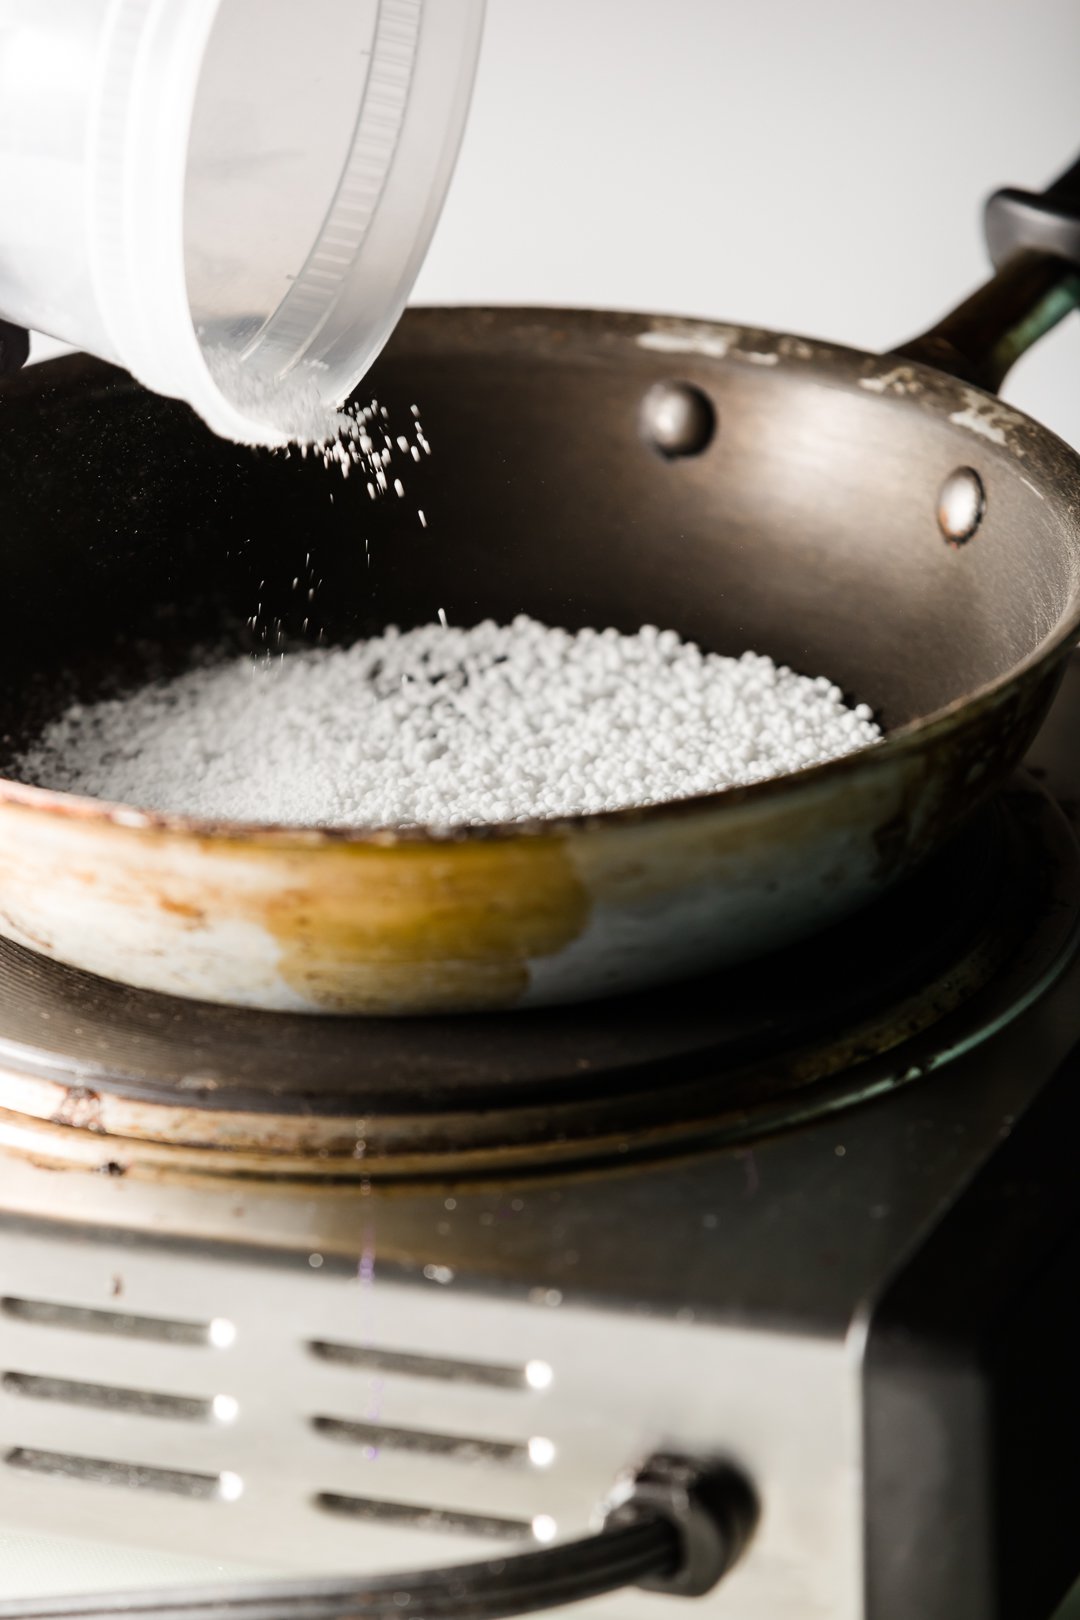 isomalt powder being poured into a skillet